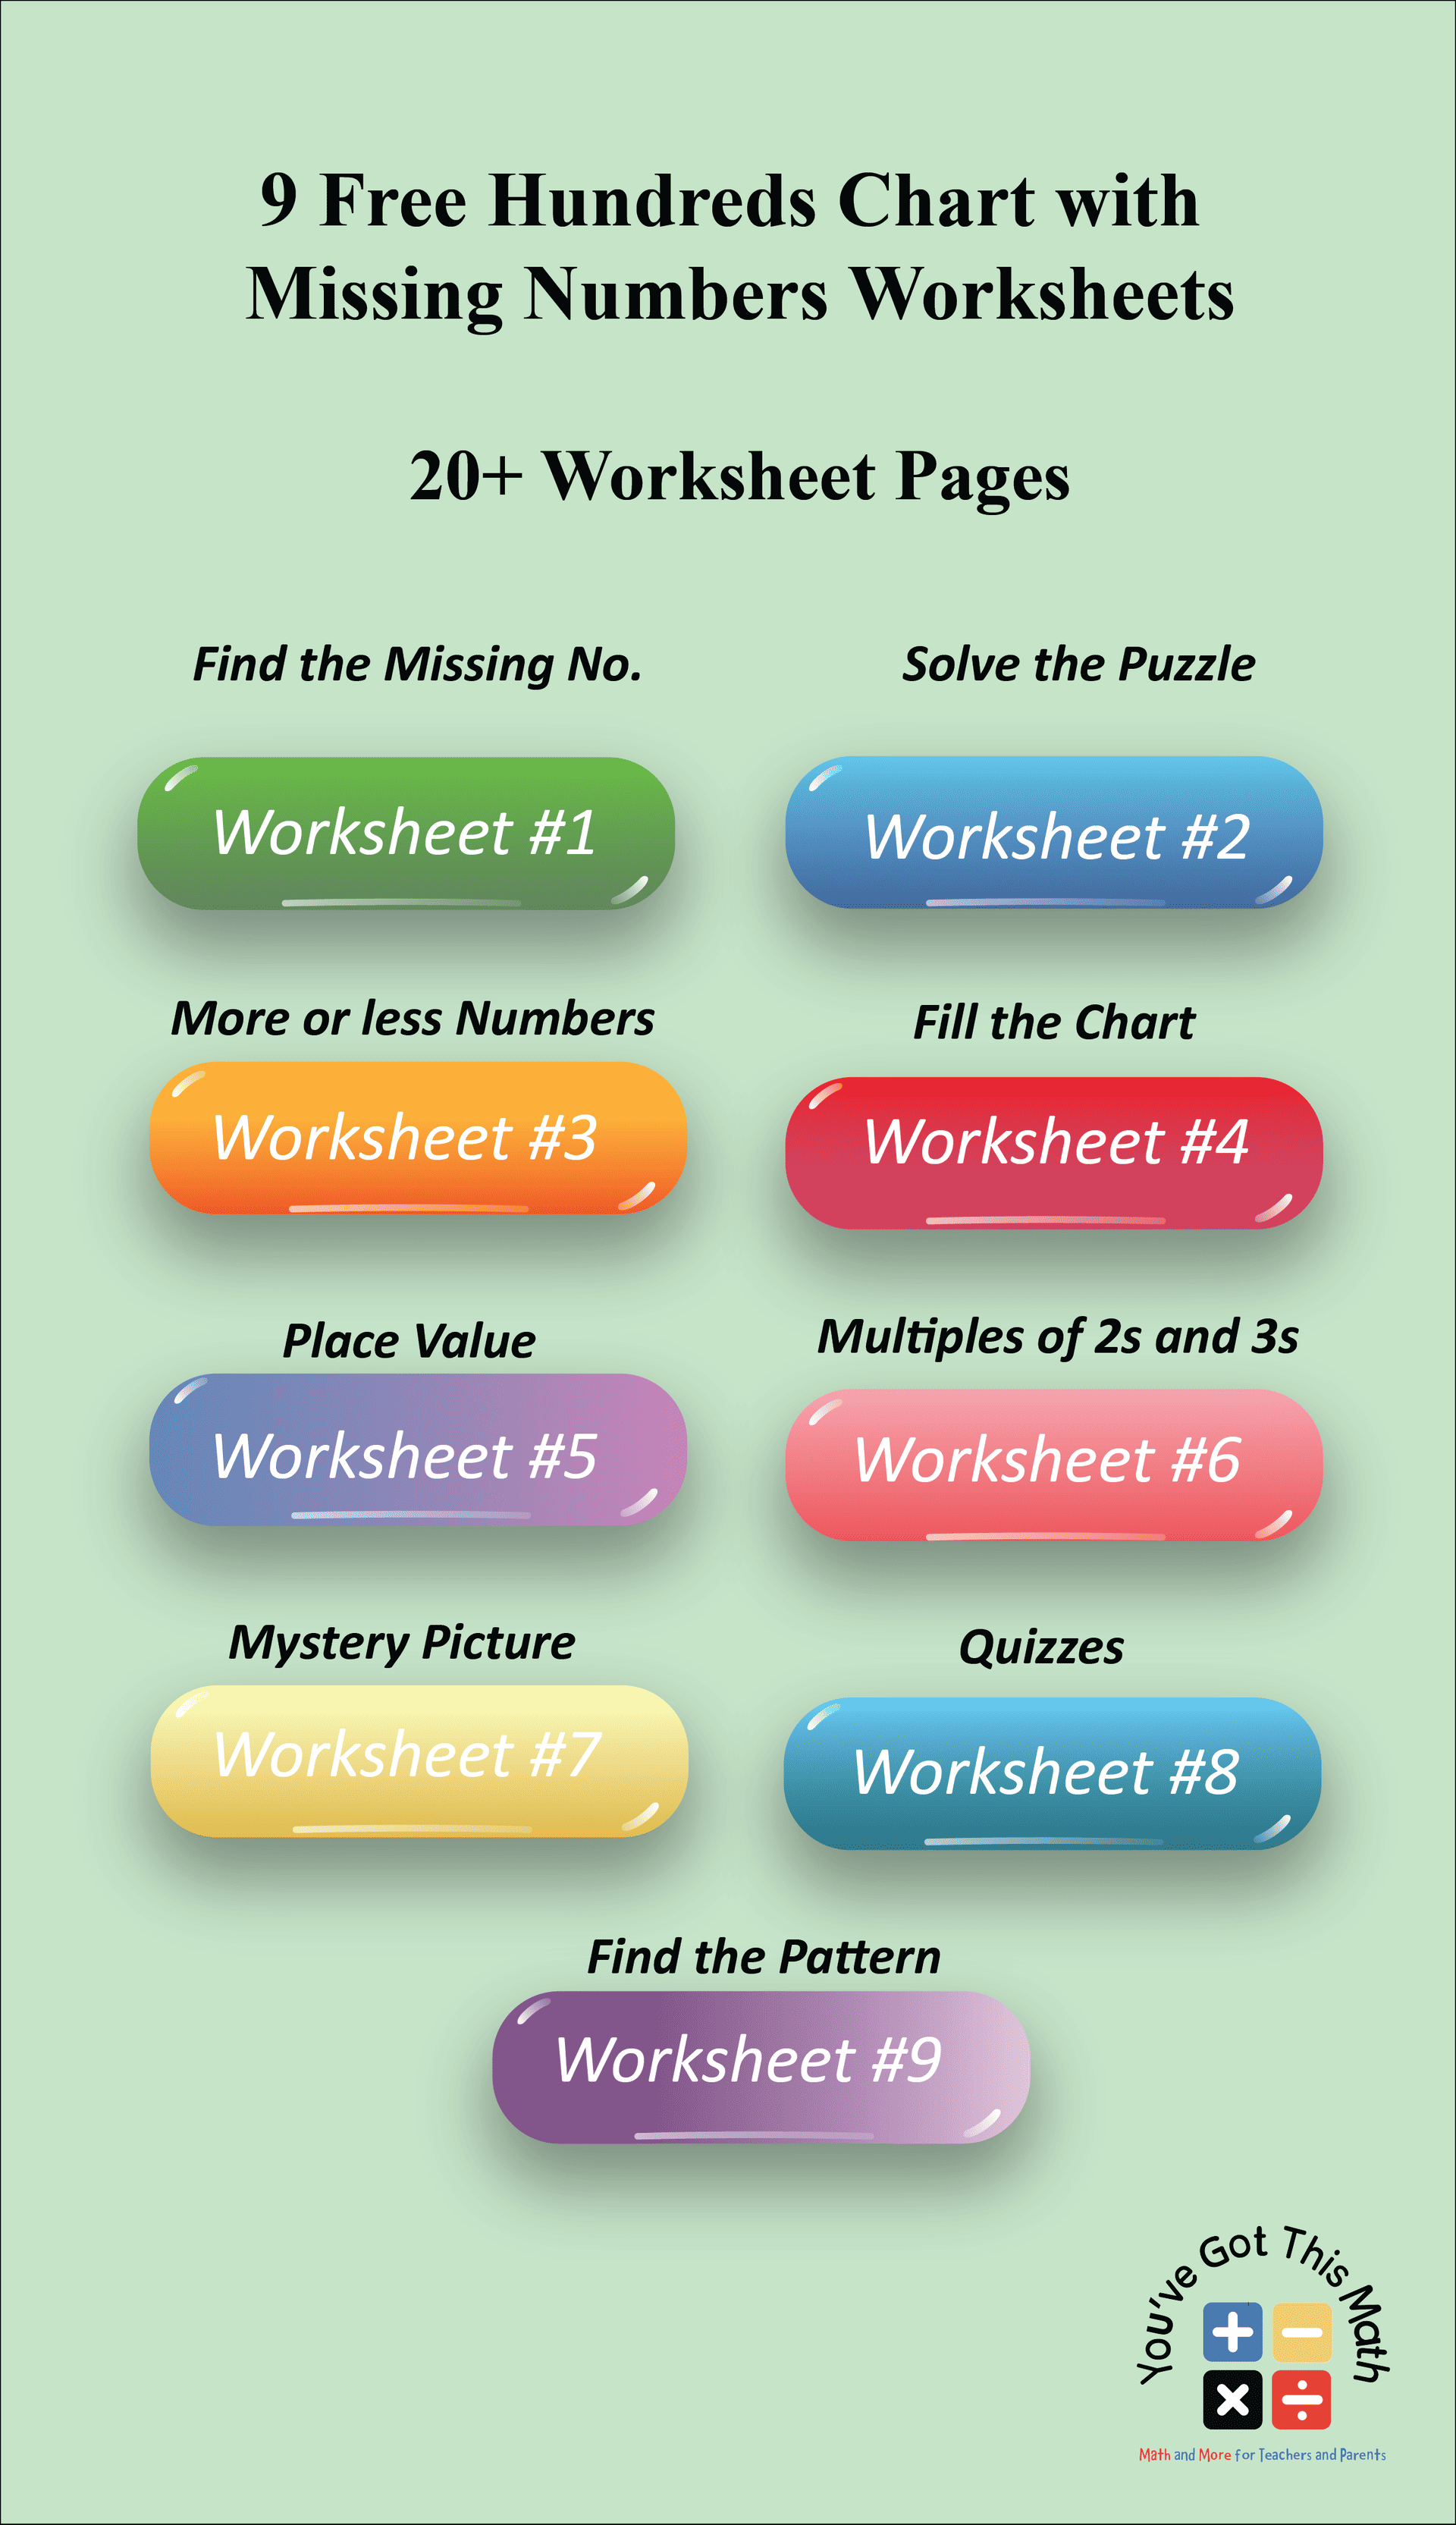 9 Free Hundreds Chart with Missing Numbers Worksheets